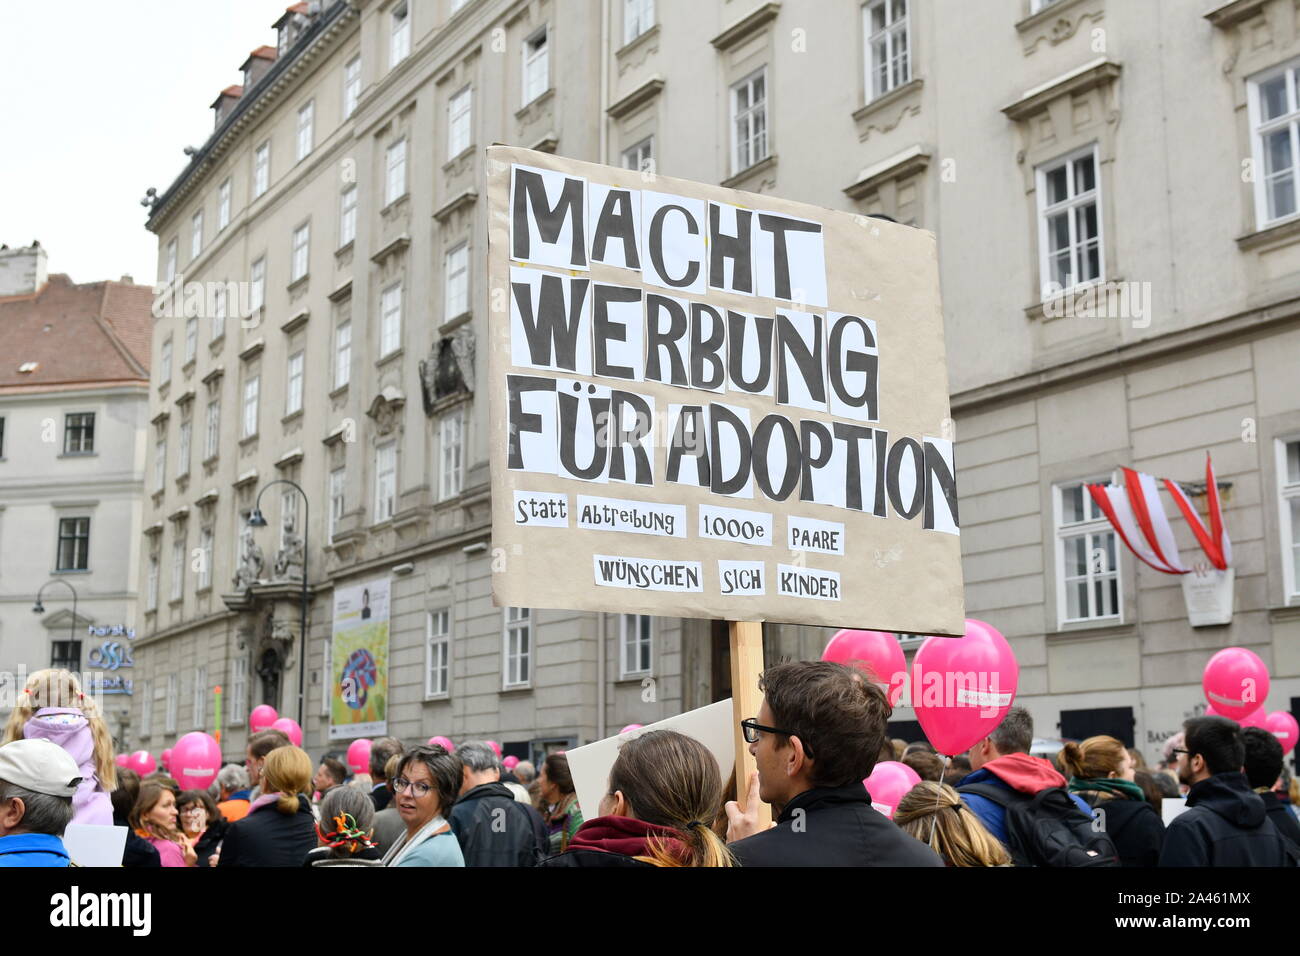 Vienna, Austria. 12th Oct, 2019. Conservative abortion protesters demonstrate again on Saturday, October 12, 2019 in Vienna for the tightening of the 'deadlines regulation'. The 'march for life' is supported by the Archdiocese of Vienna. Banner that reads 'Advertise Adoption'.  Franz Perc / Alamy Live News Stock Photo